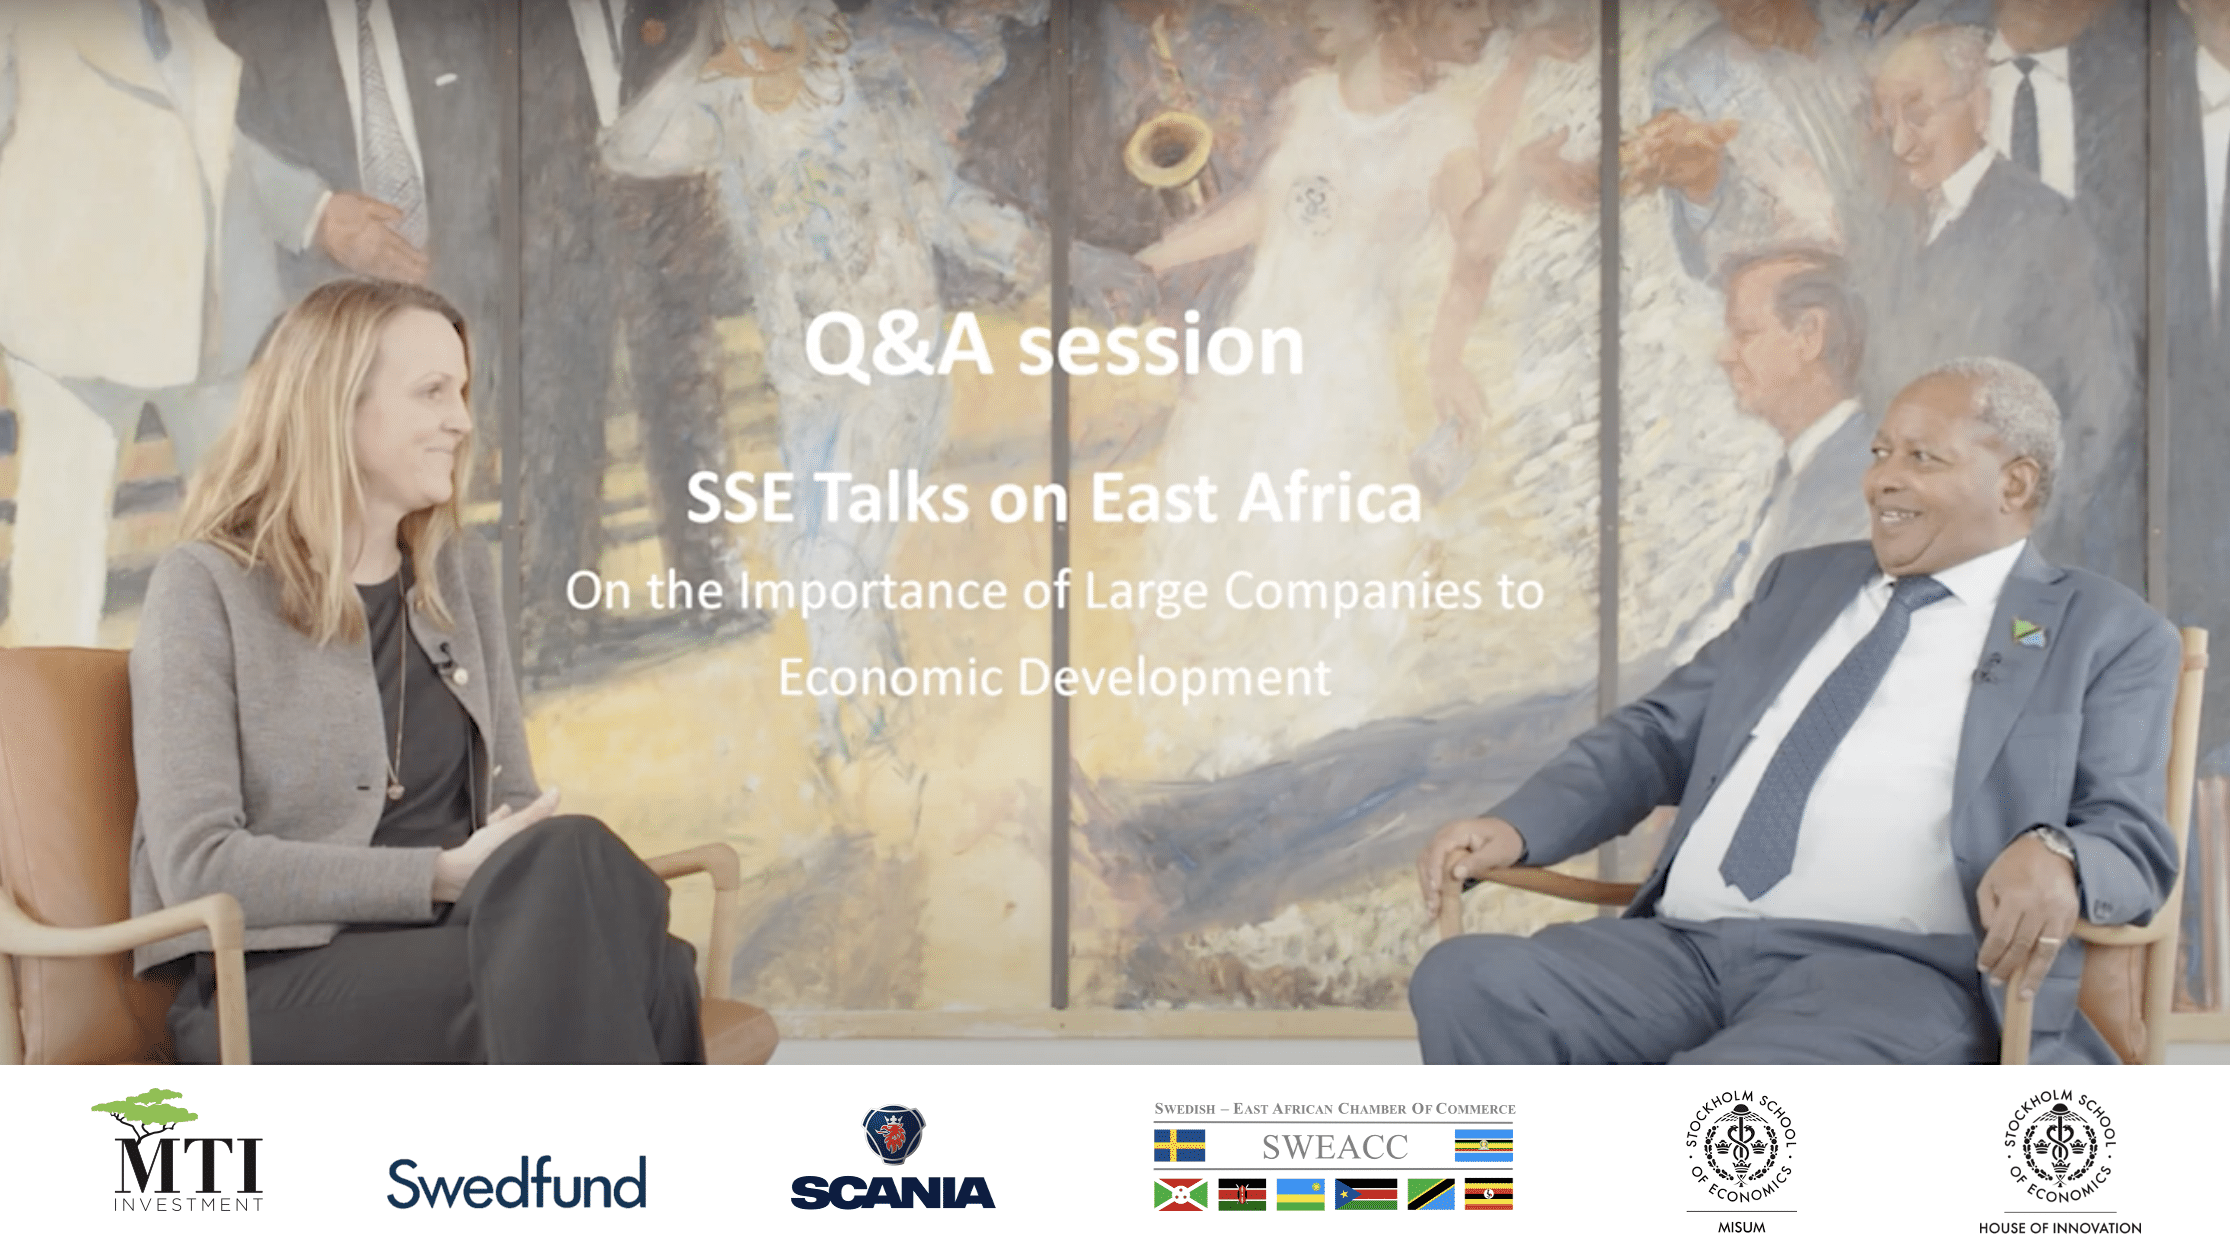 A man and a woman sitting and discuss about the impact of large companies to the economic development in Africa